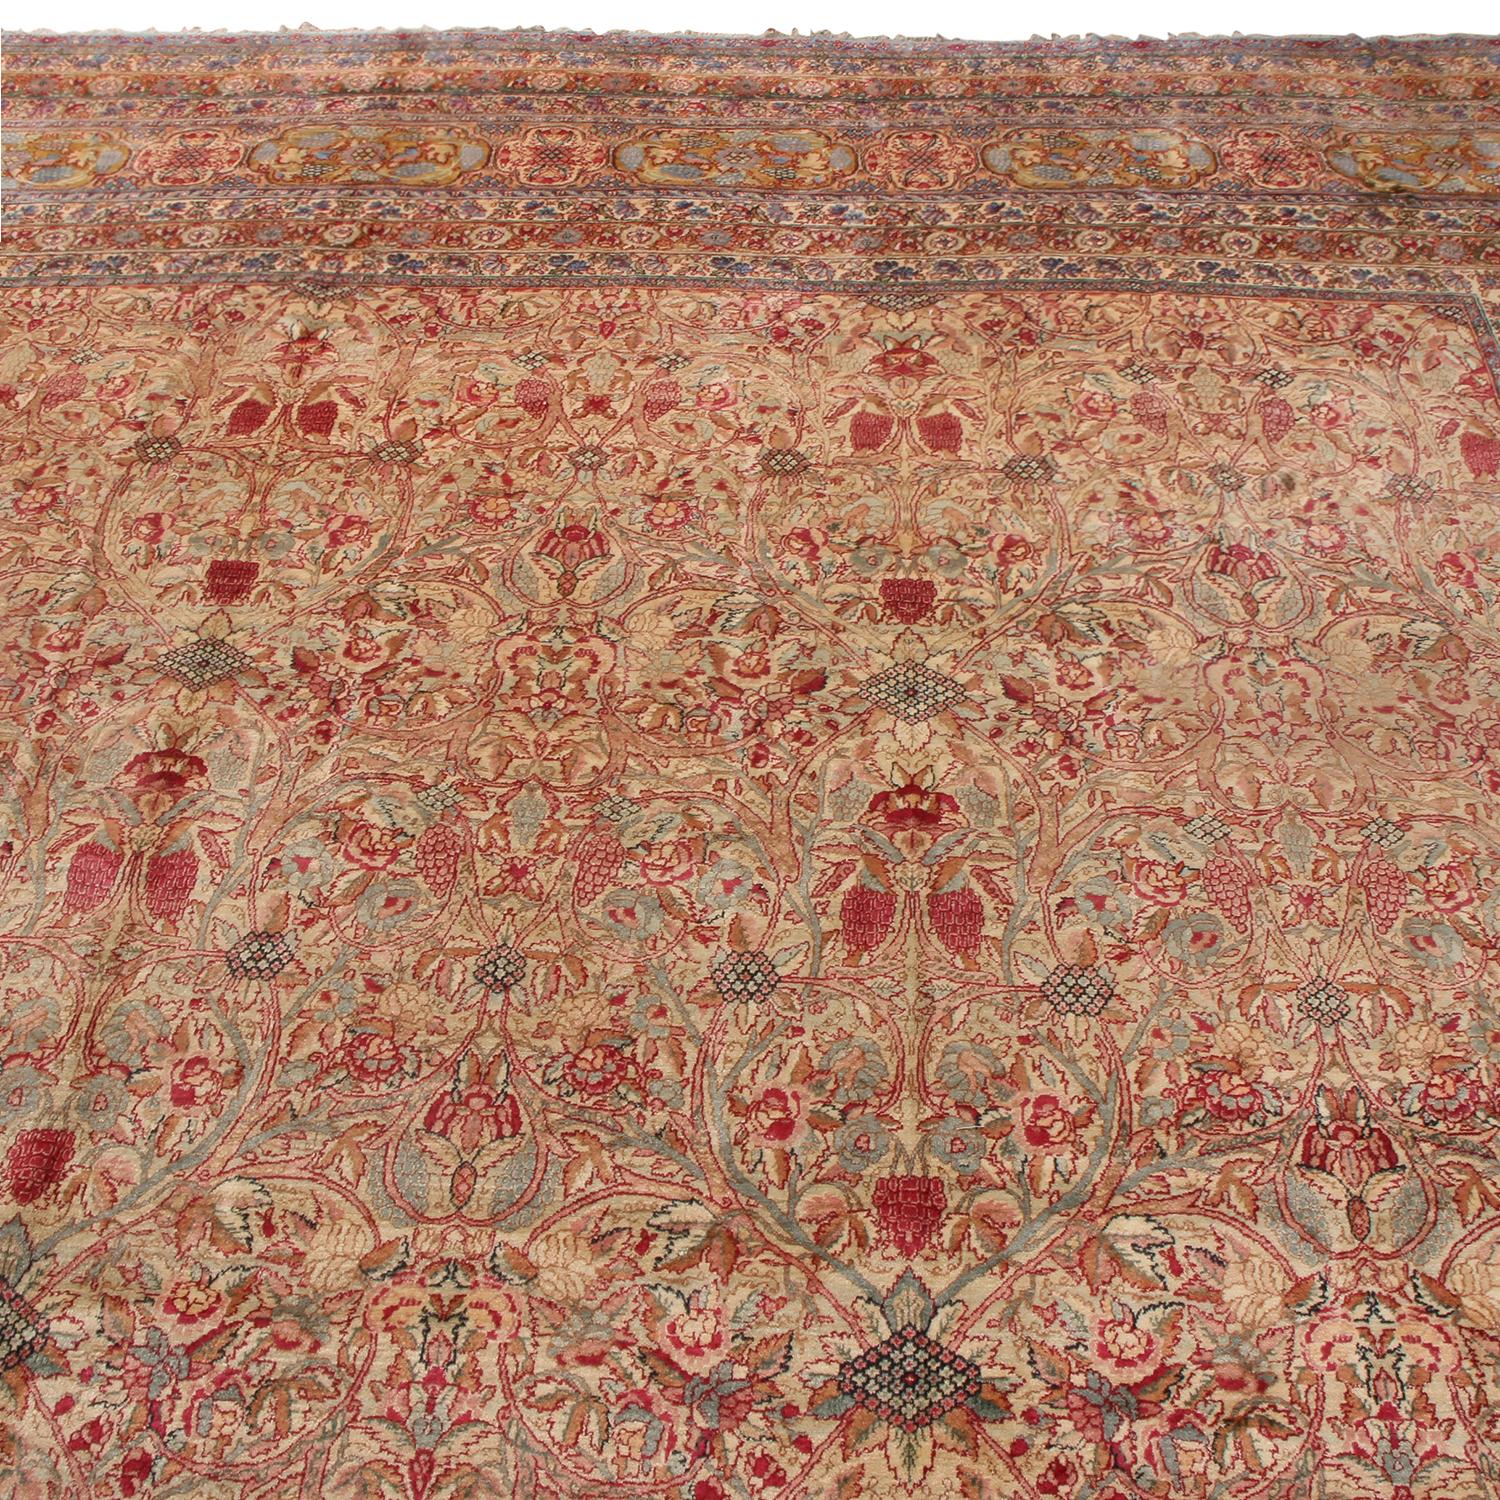 Hailing from Persia between 1890-1900, this antique Kerman rug is named for its origins in one of the most acclaimed provinces of Persian rug making spanning centuries. Enjoying hand-knotted high-quality wool and natural dyes in a rich complementary